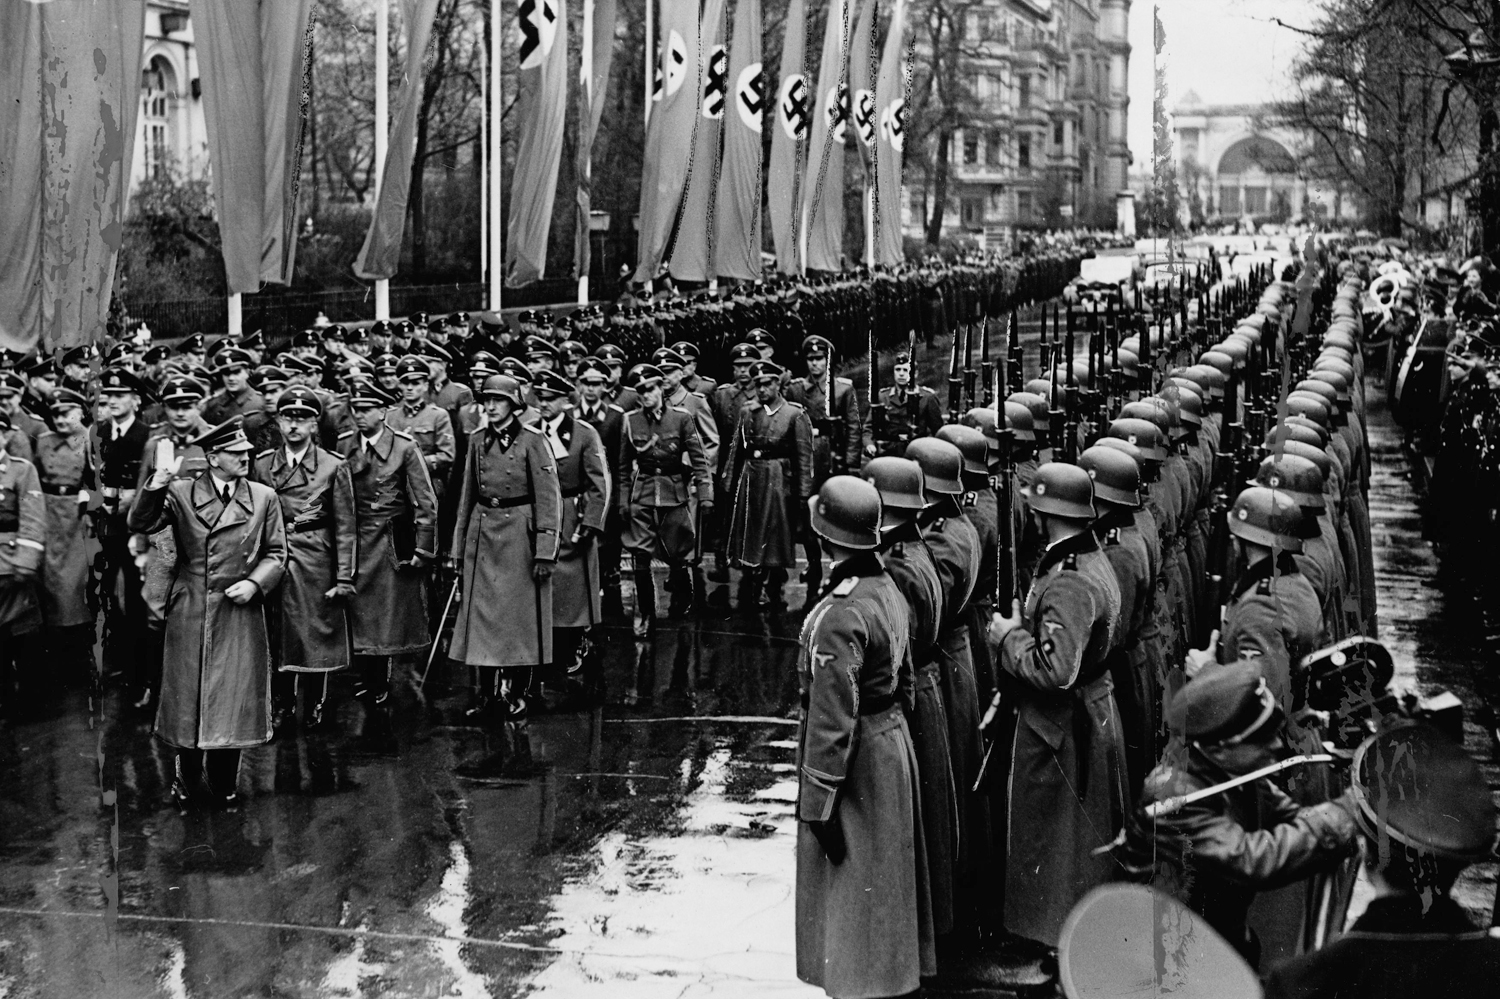 Adolf Hitler inspects the SS honor company in front of the Reichstag